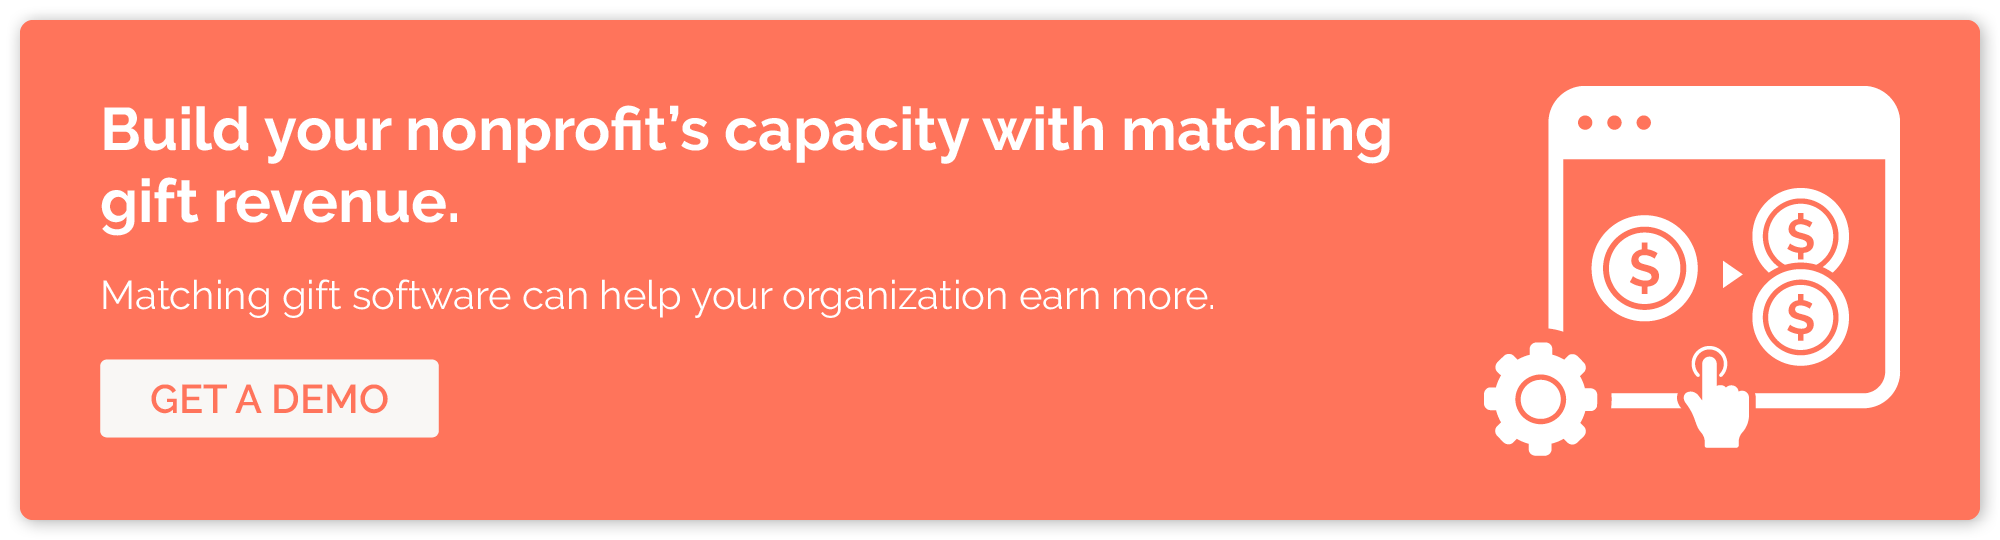 Click through to get a demo of our matching gift software and build your nonprofit's capacity.